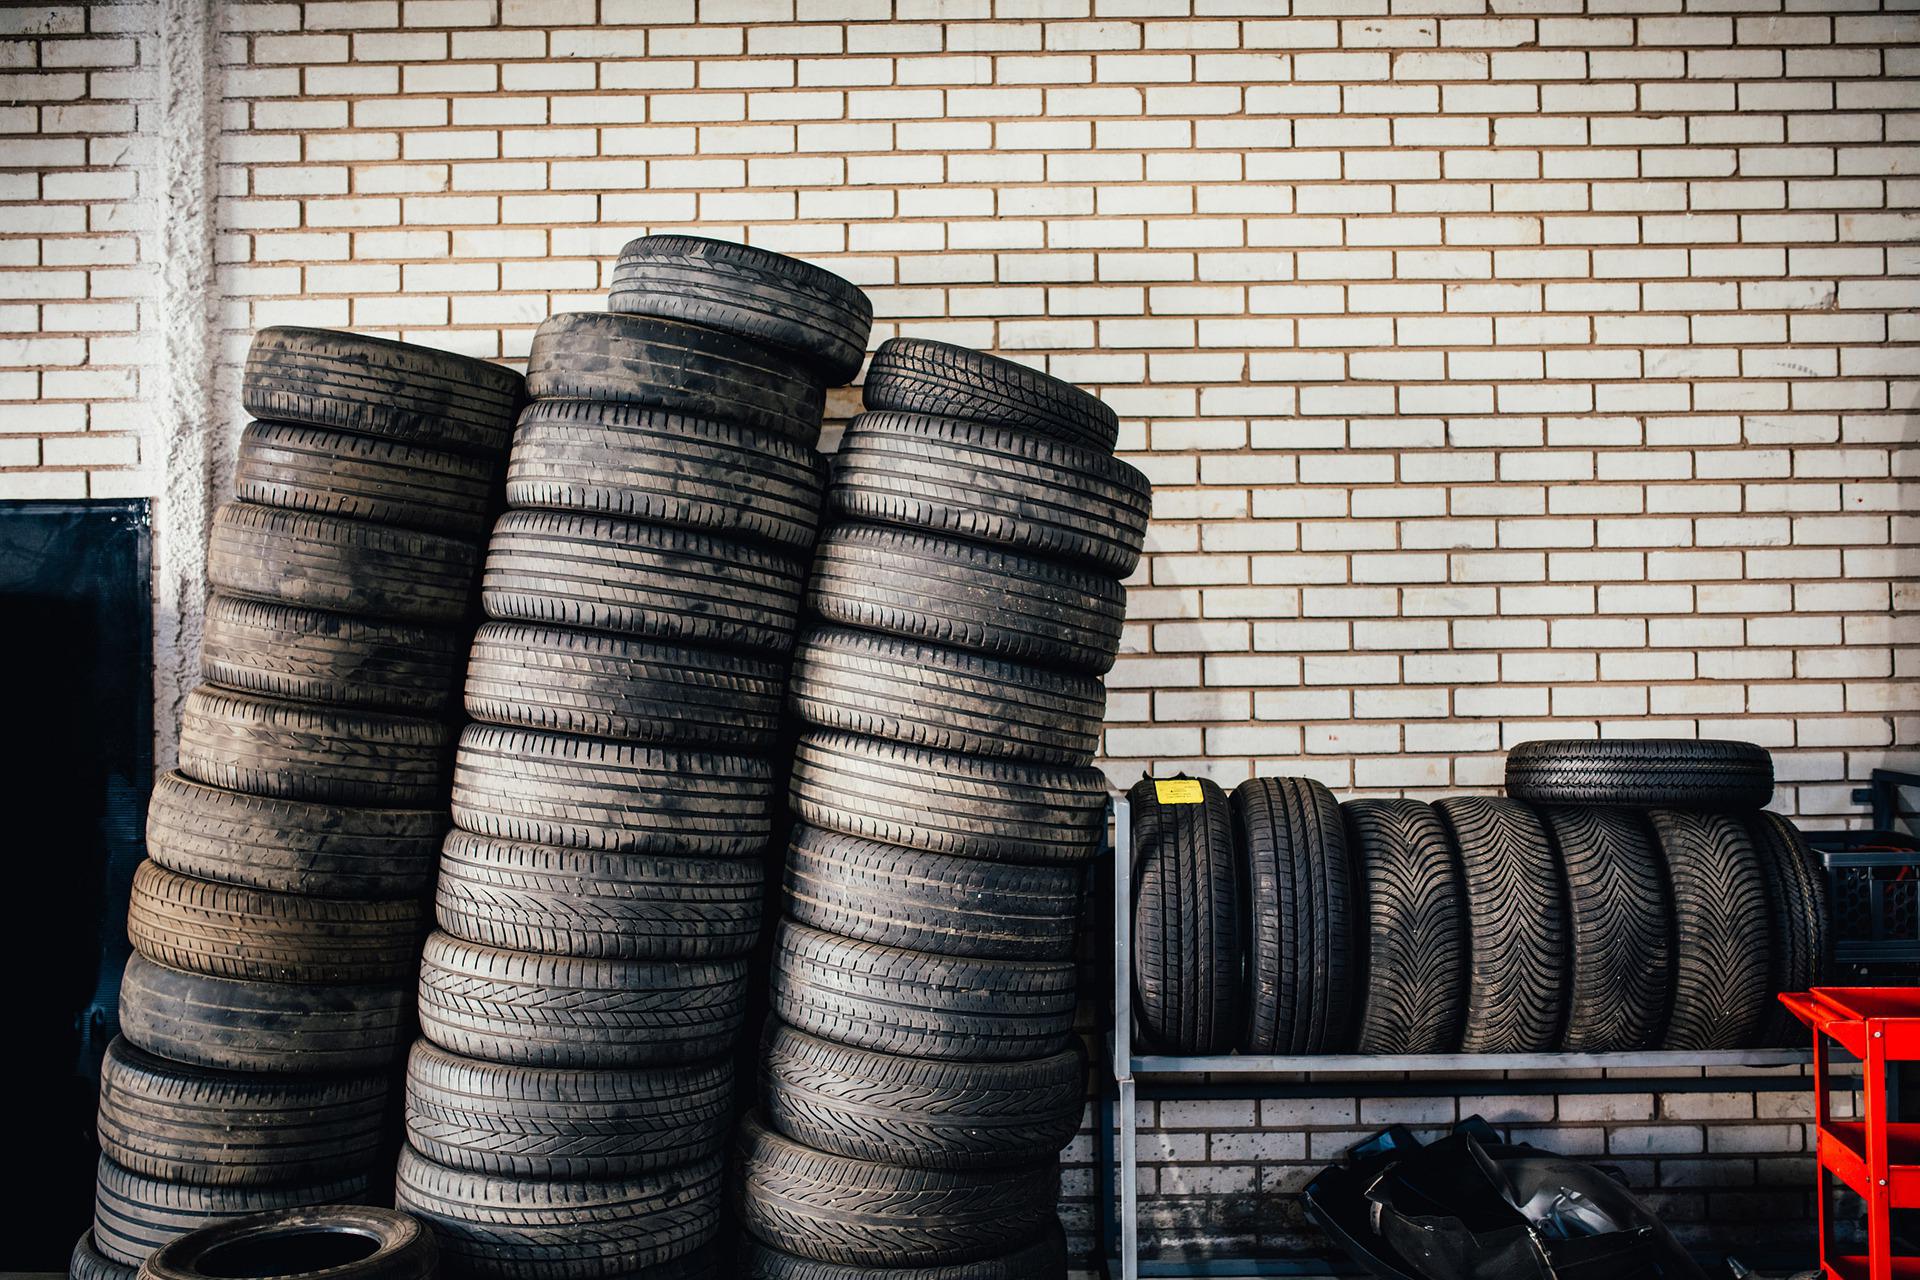 A stack of tires in an auto garage